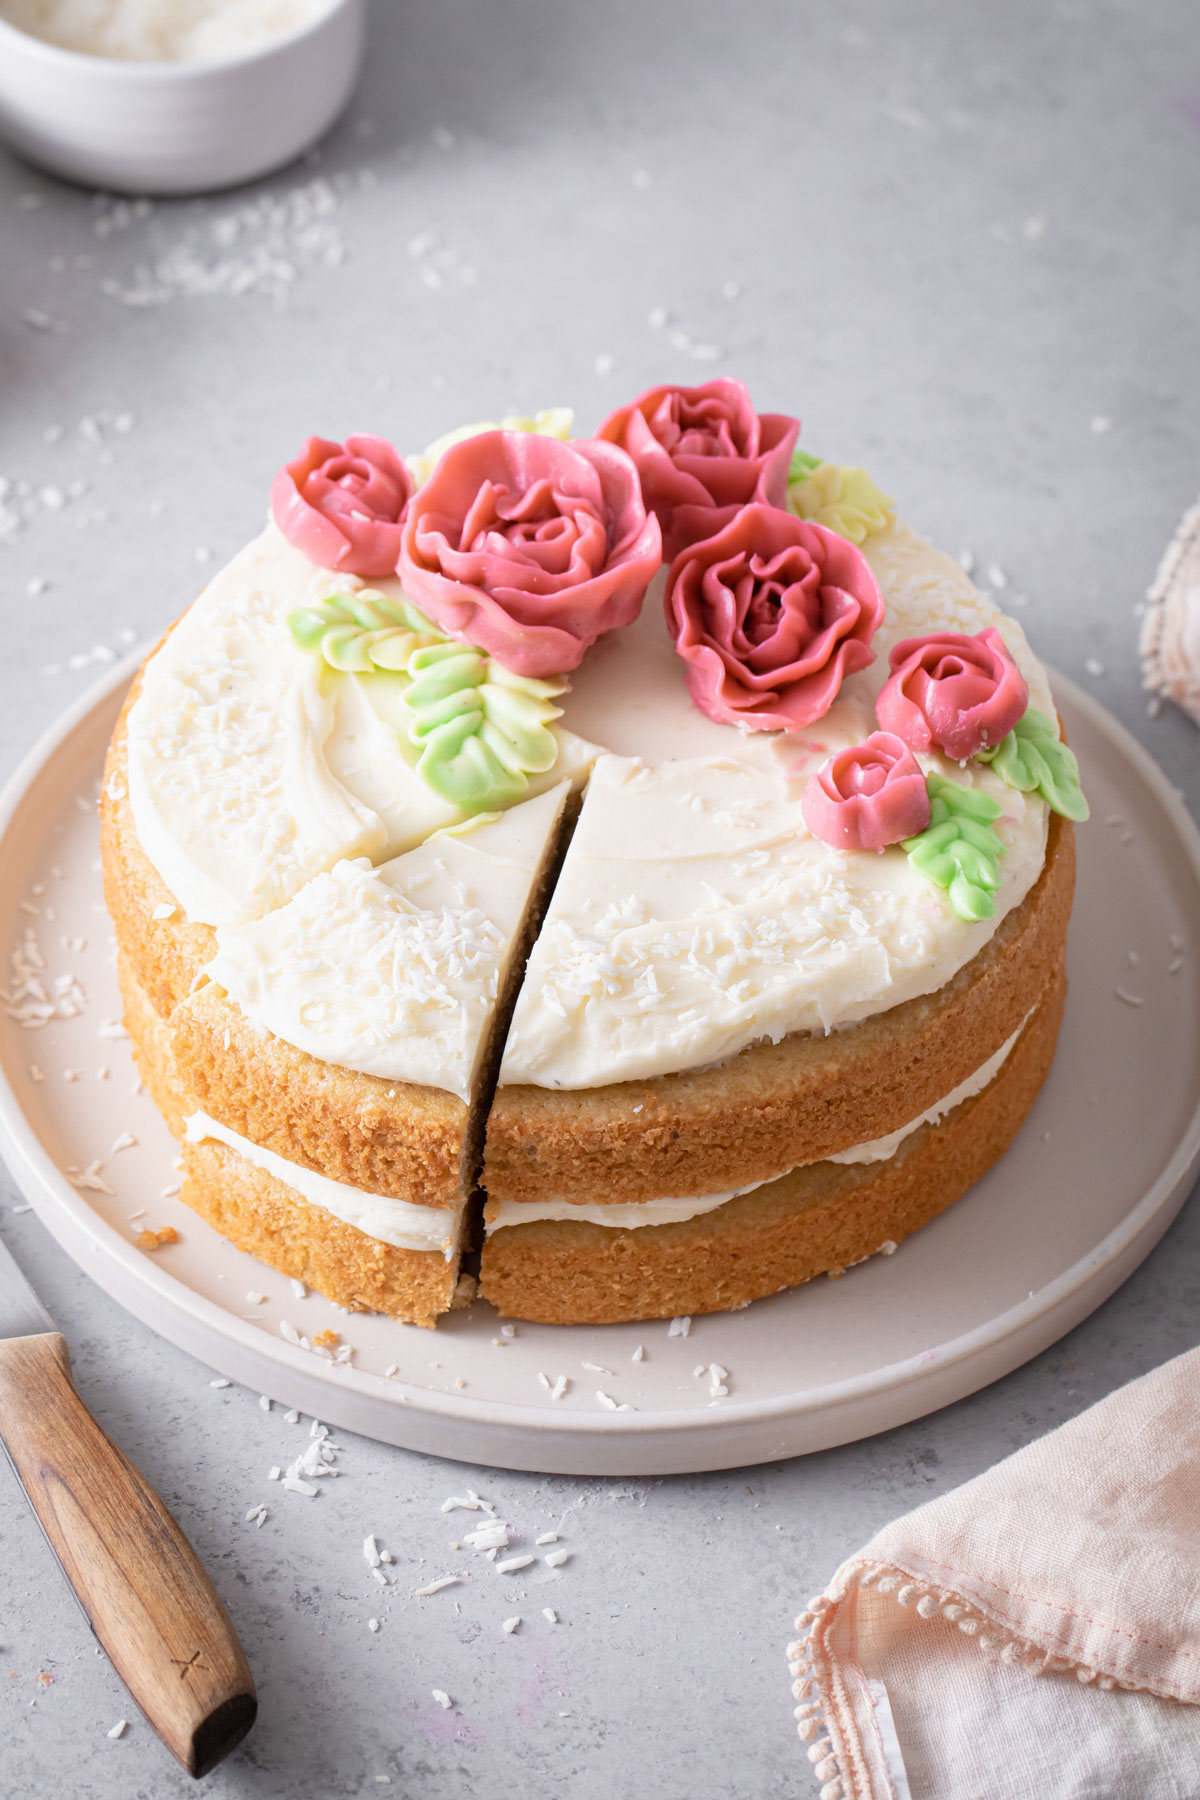 A two-layer almond cake with cream cheese frosting and pink buttercream roses on top